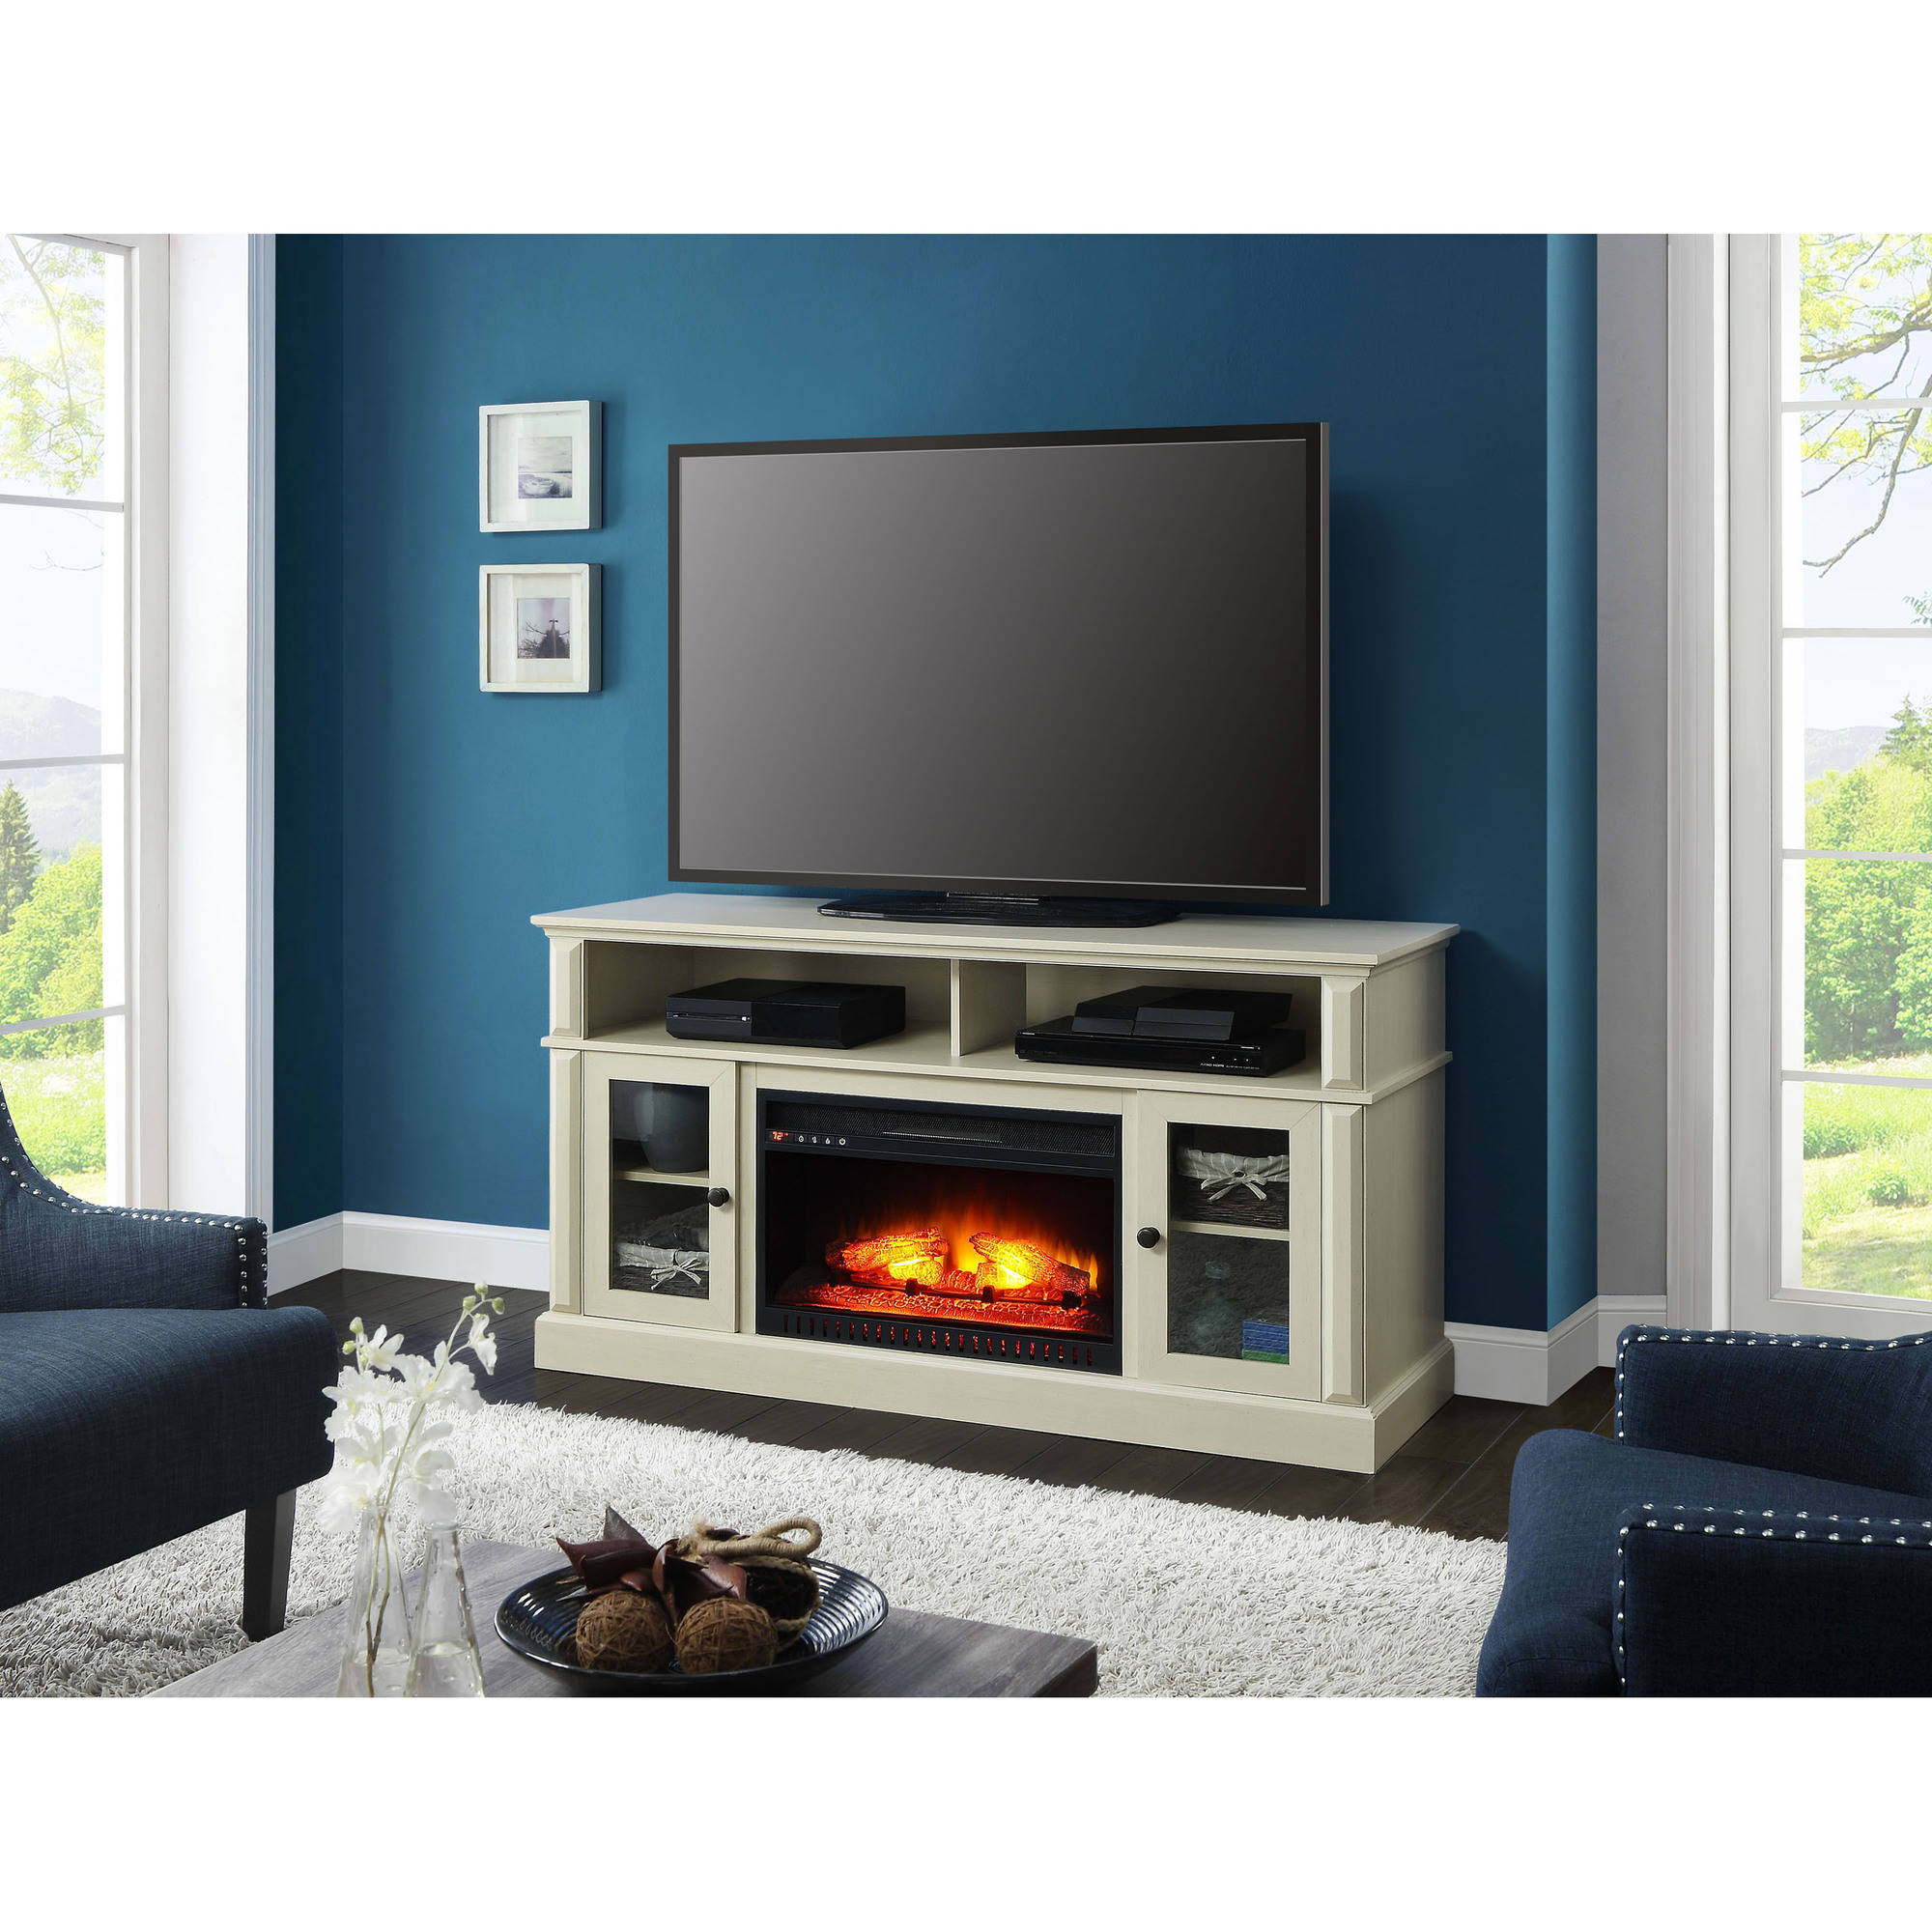 Tv Stand with Fireplace 70 Inch Best Of Whalen Barston Media Fireplace for Tv S Up to 70 Multiple